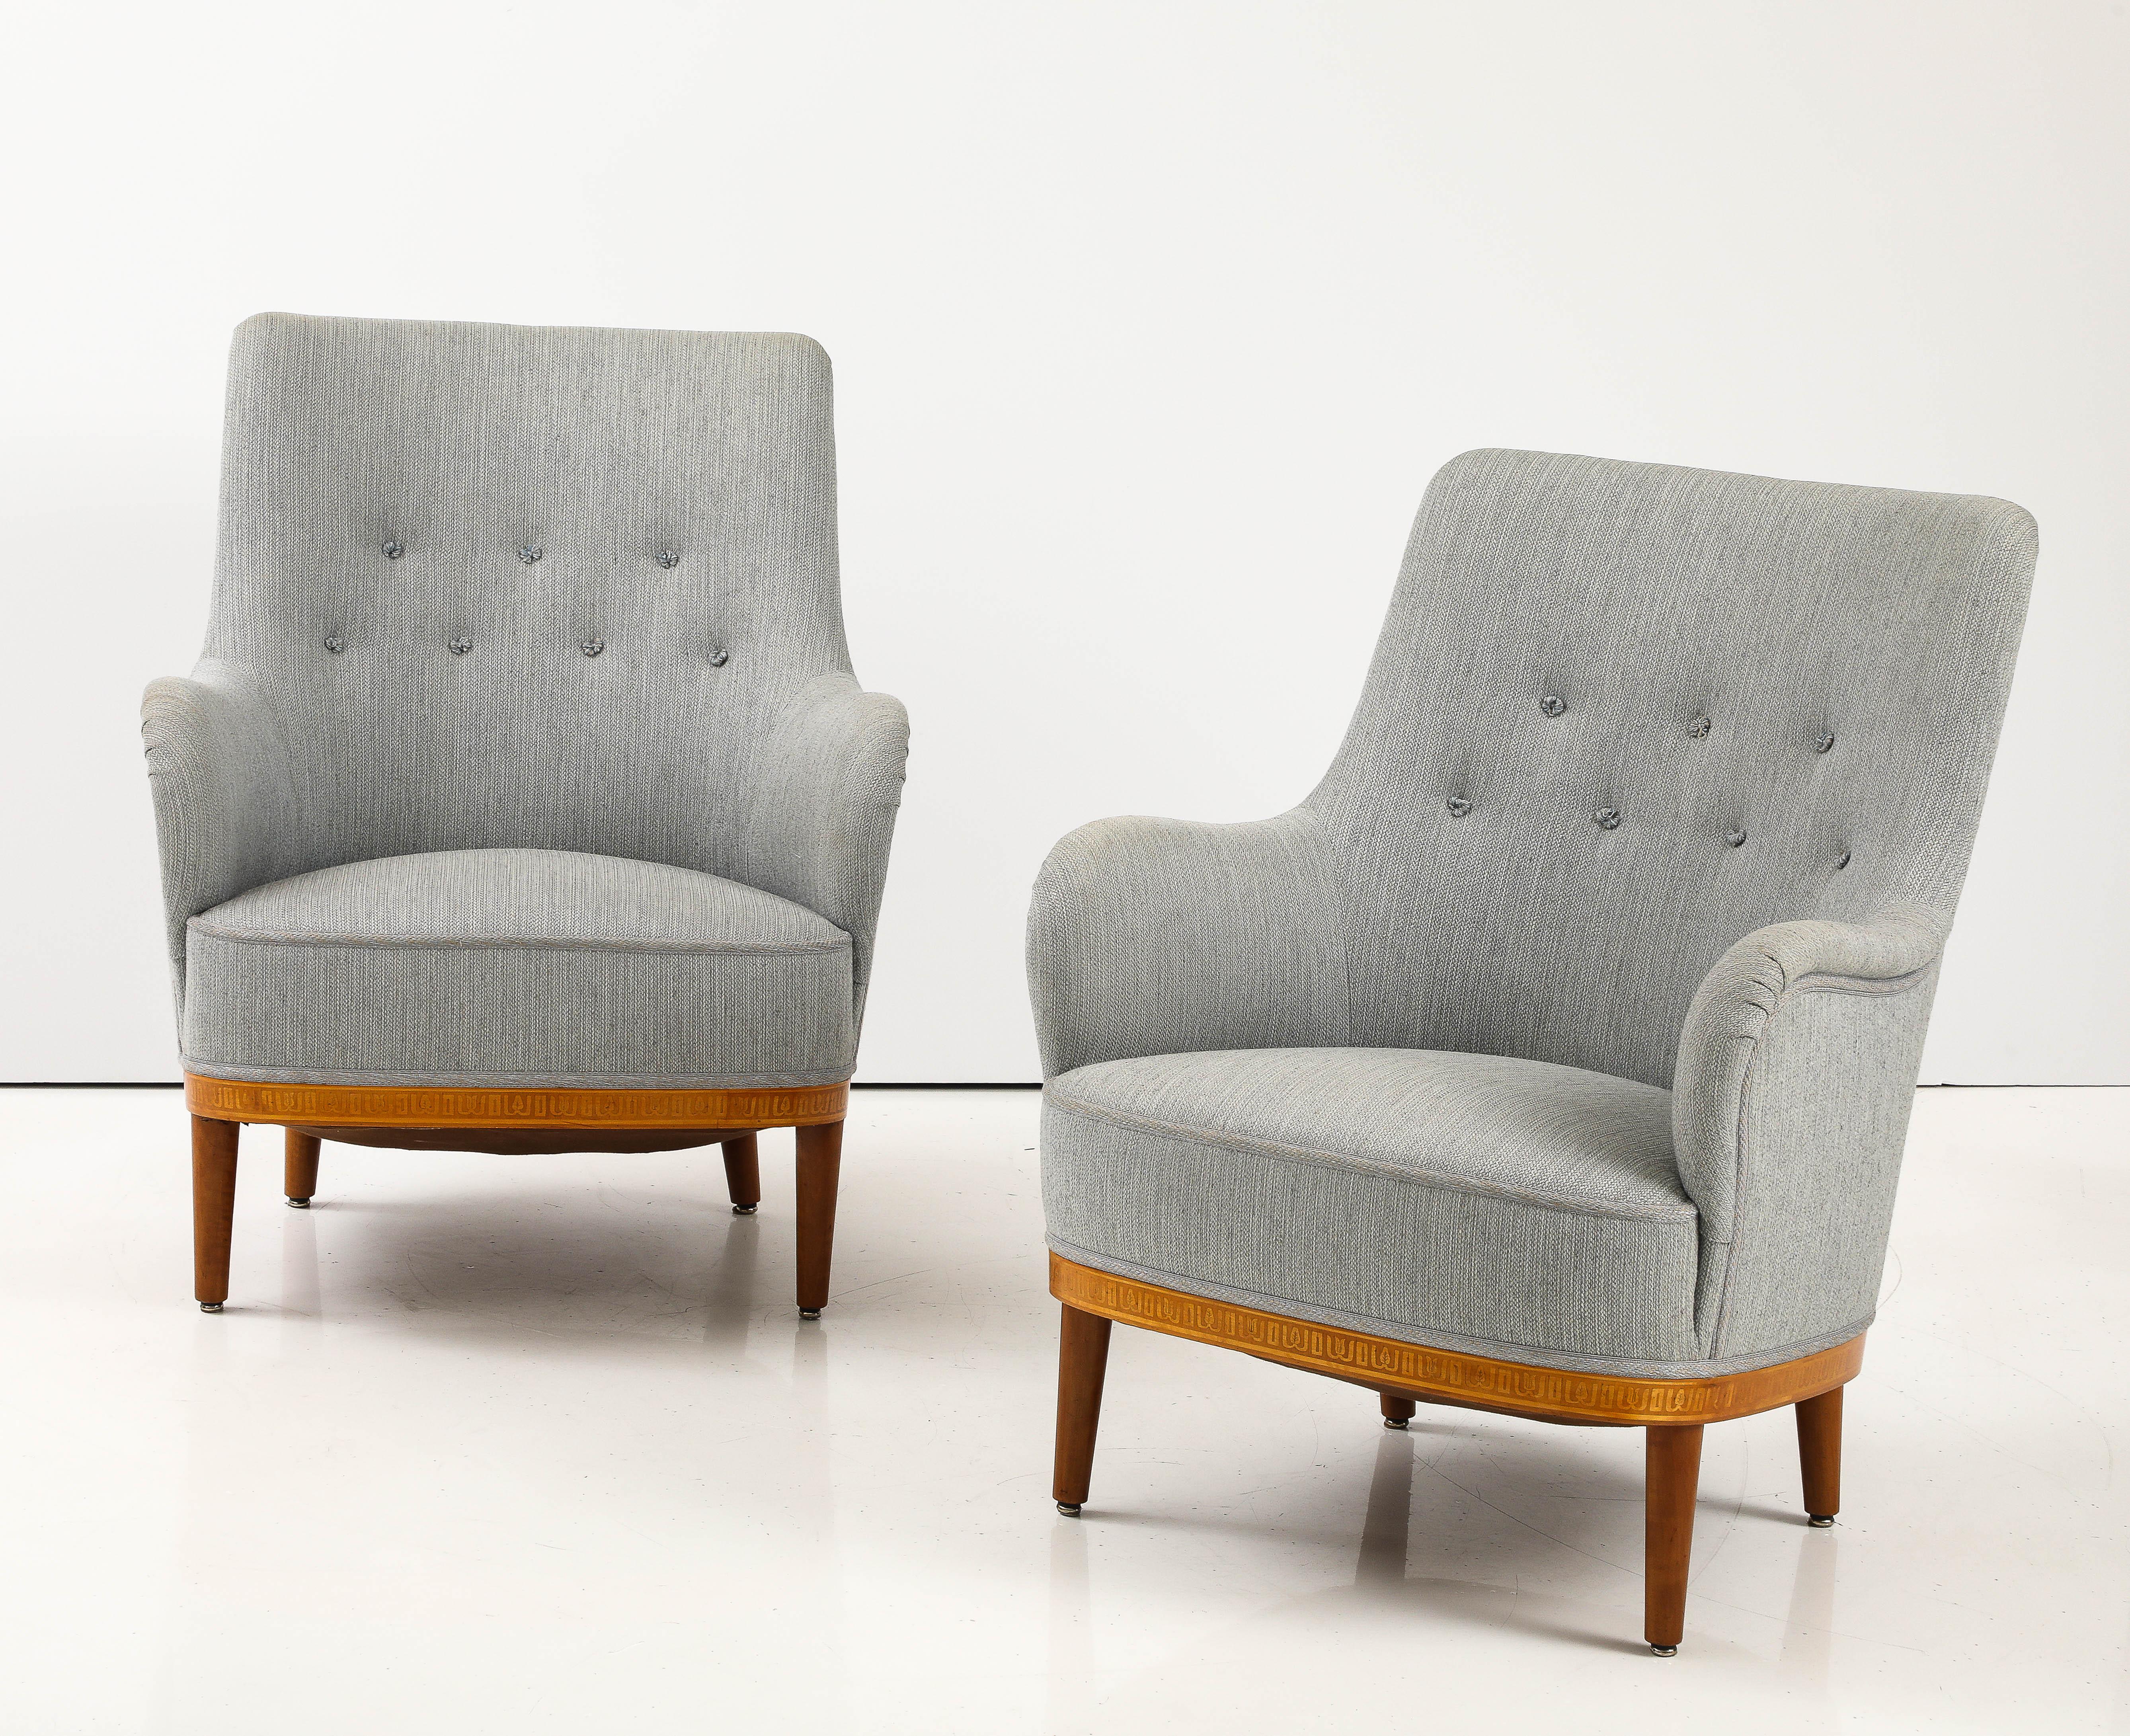 A pair of Swedish Carl Malmsten birch and mahogany armchairs, Circa 1940s, with curved upholstered seat and back, a neoclassical inspired fruitwood inlaid frieze raised on circular turned and tapered legs. The underside with an upholsterers label.